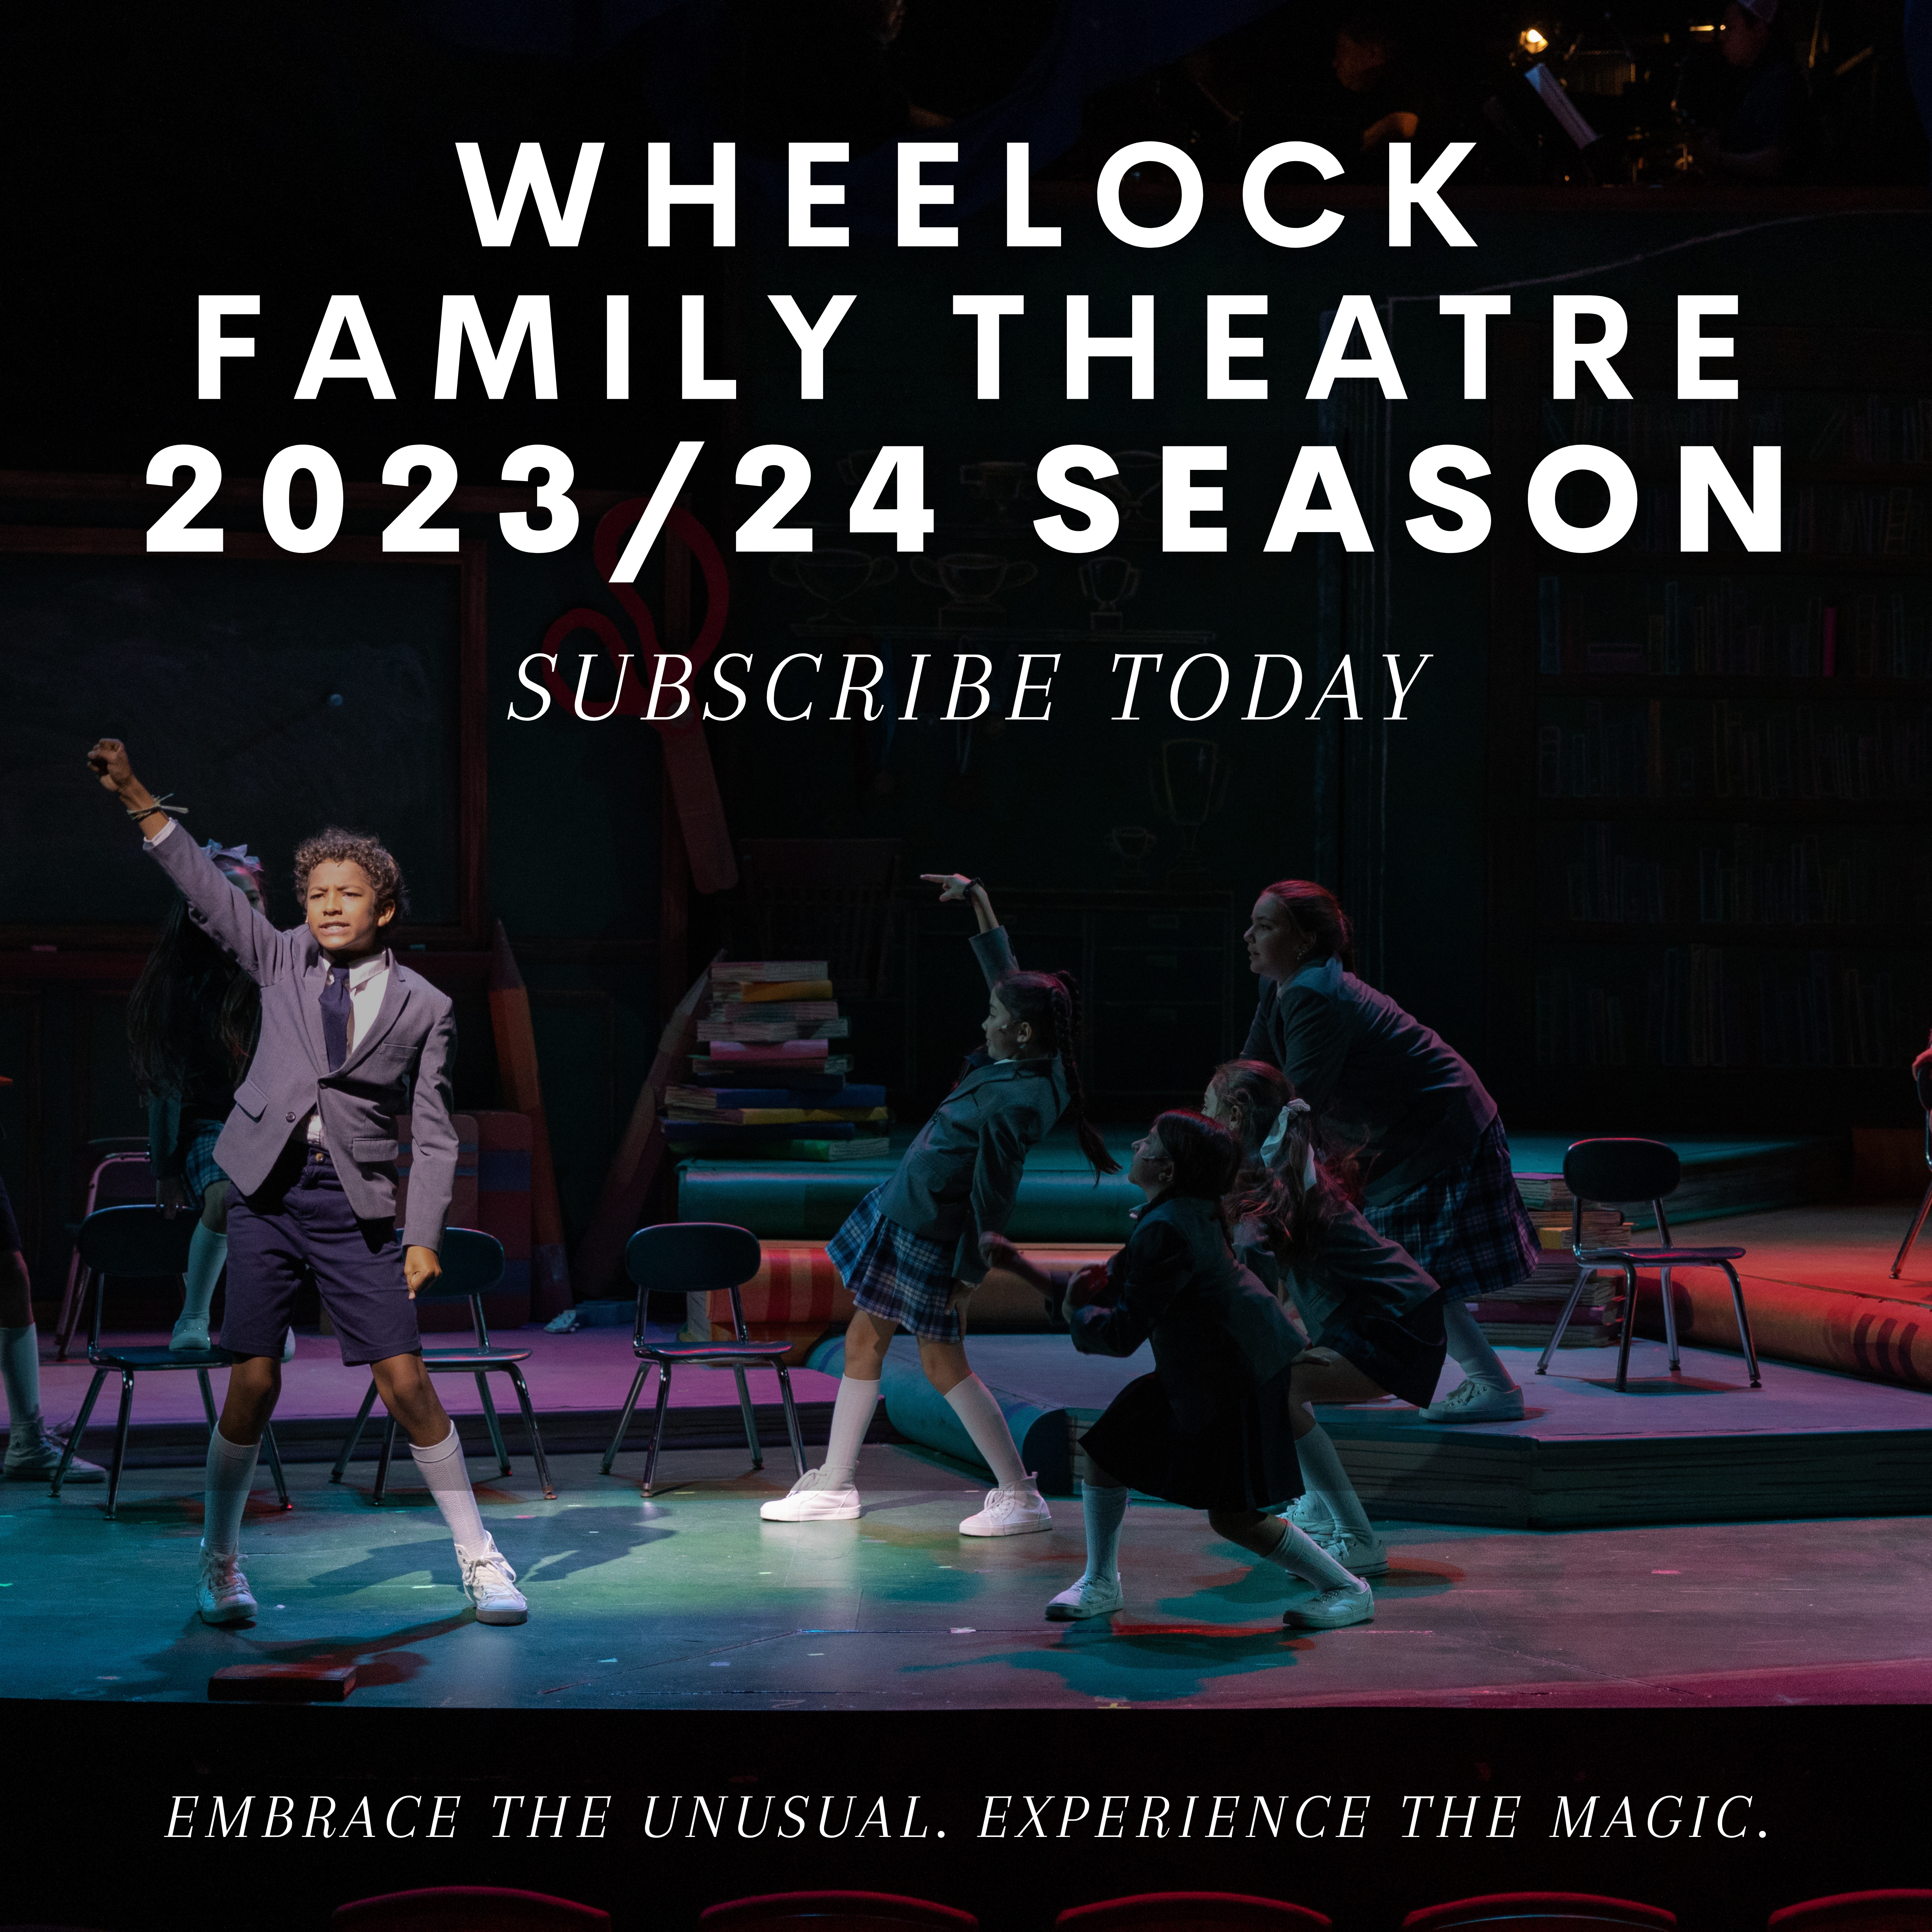 Image reads "Wheelock Family Theatre 2023/24 Season. Subscribe Today. Embrace the unusual. Experience the magic." 5 performers on stage. One performer is highlighted by a spotlight with their fist in the air while the other 4 are watching intently.